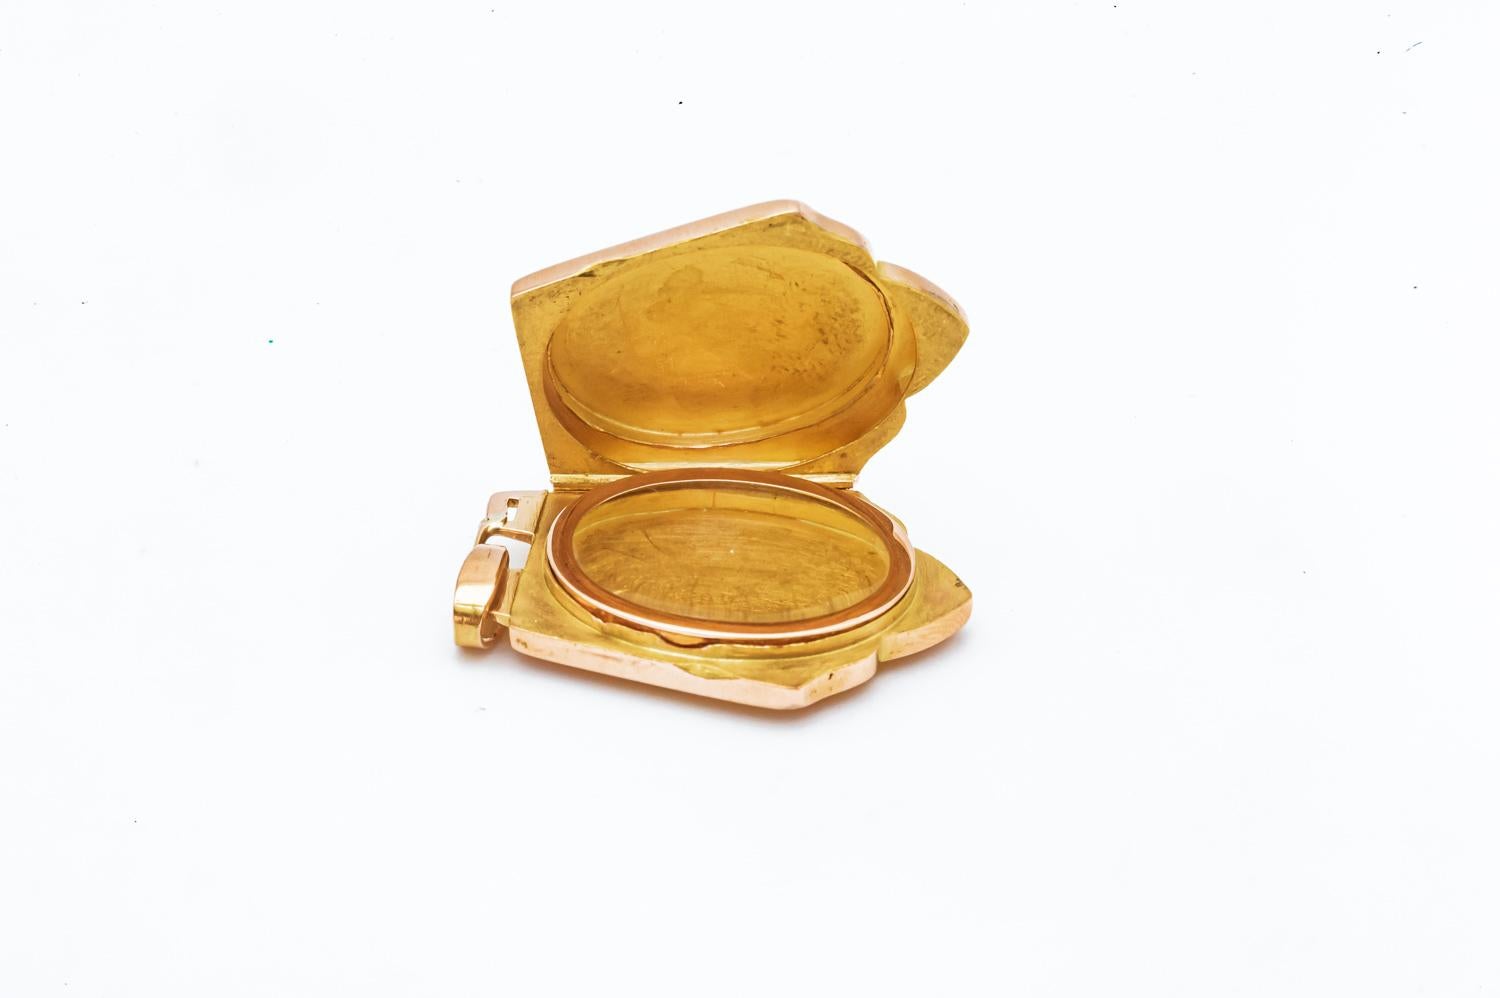 Discover this magnificent Napoleon III period photo holder pendant, a jewel of rare beauty and historical value. Crafted in 18-carat pink gold, this shield-shaped pendant is a true treasure of yesteryear.

The front of the pendant is adorned with a